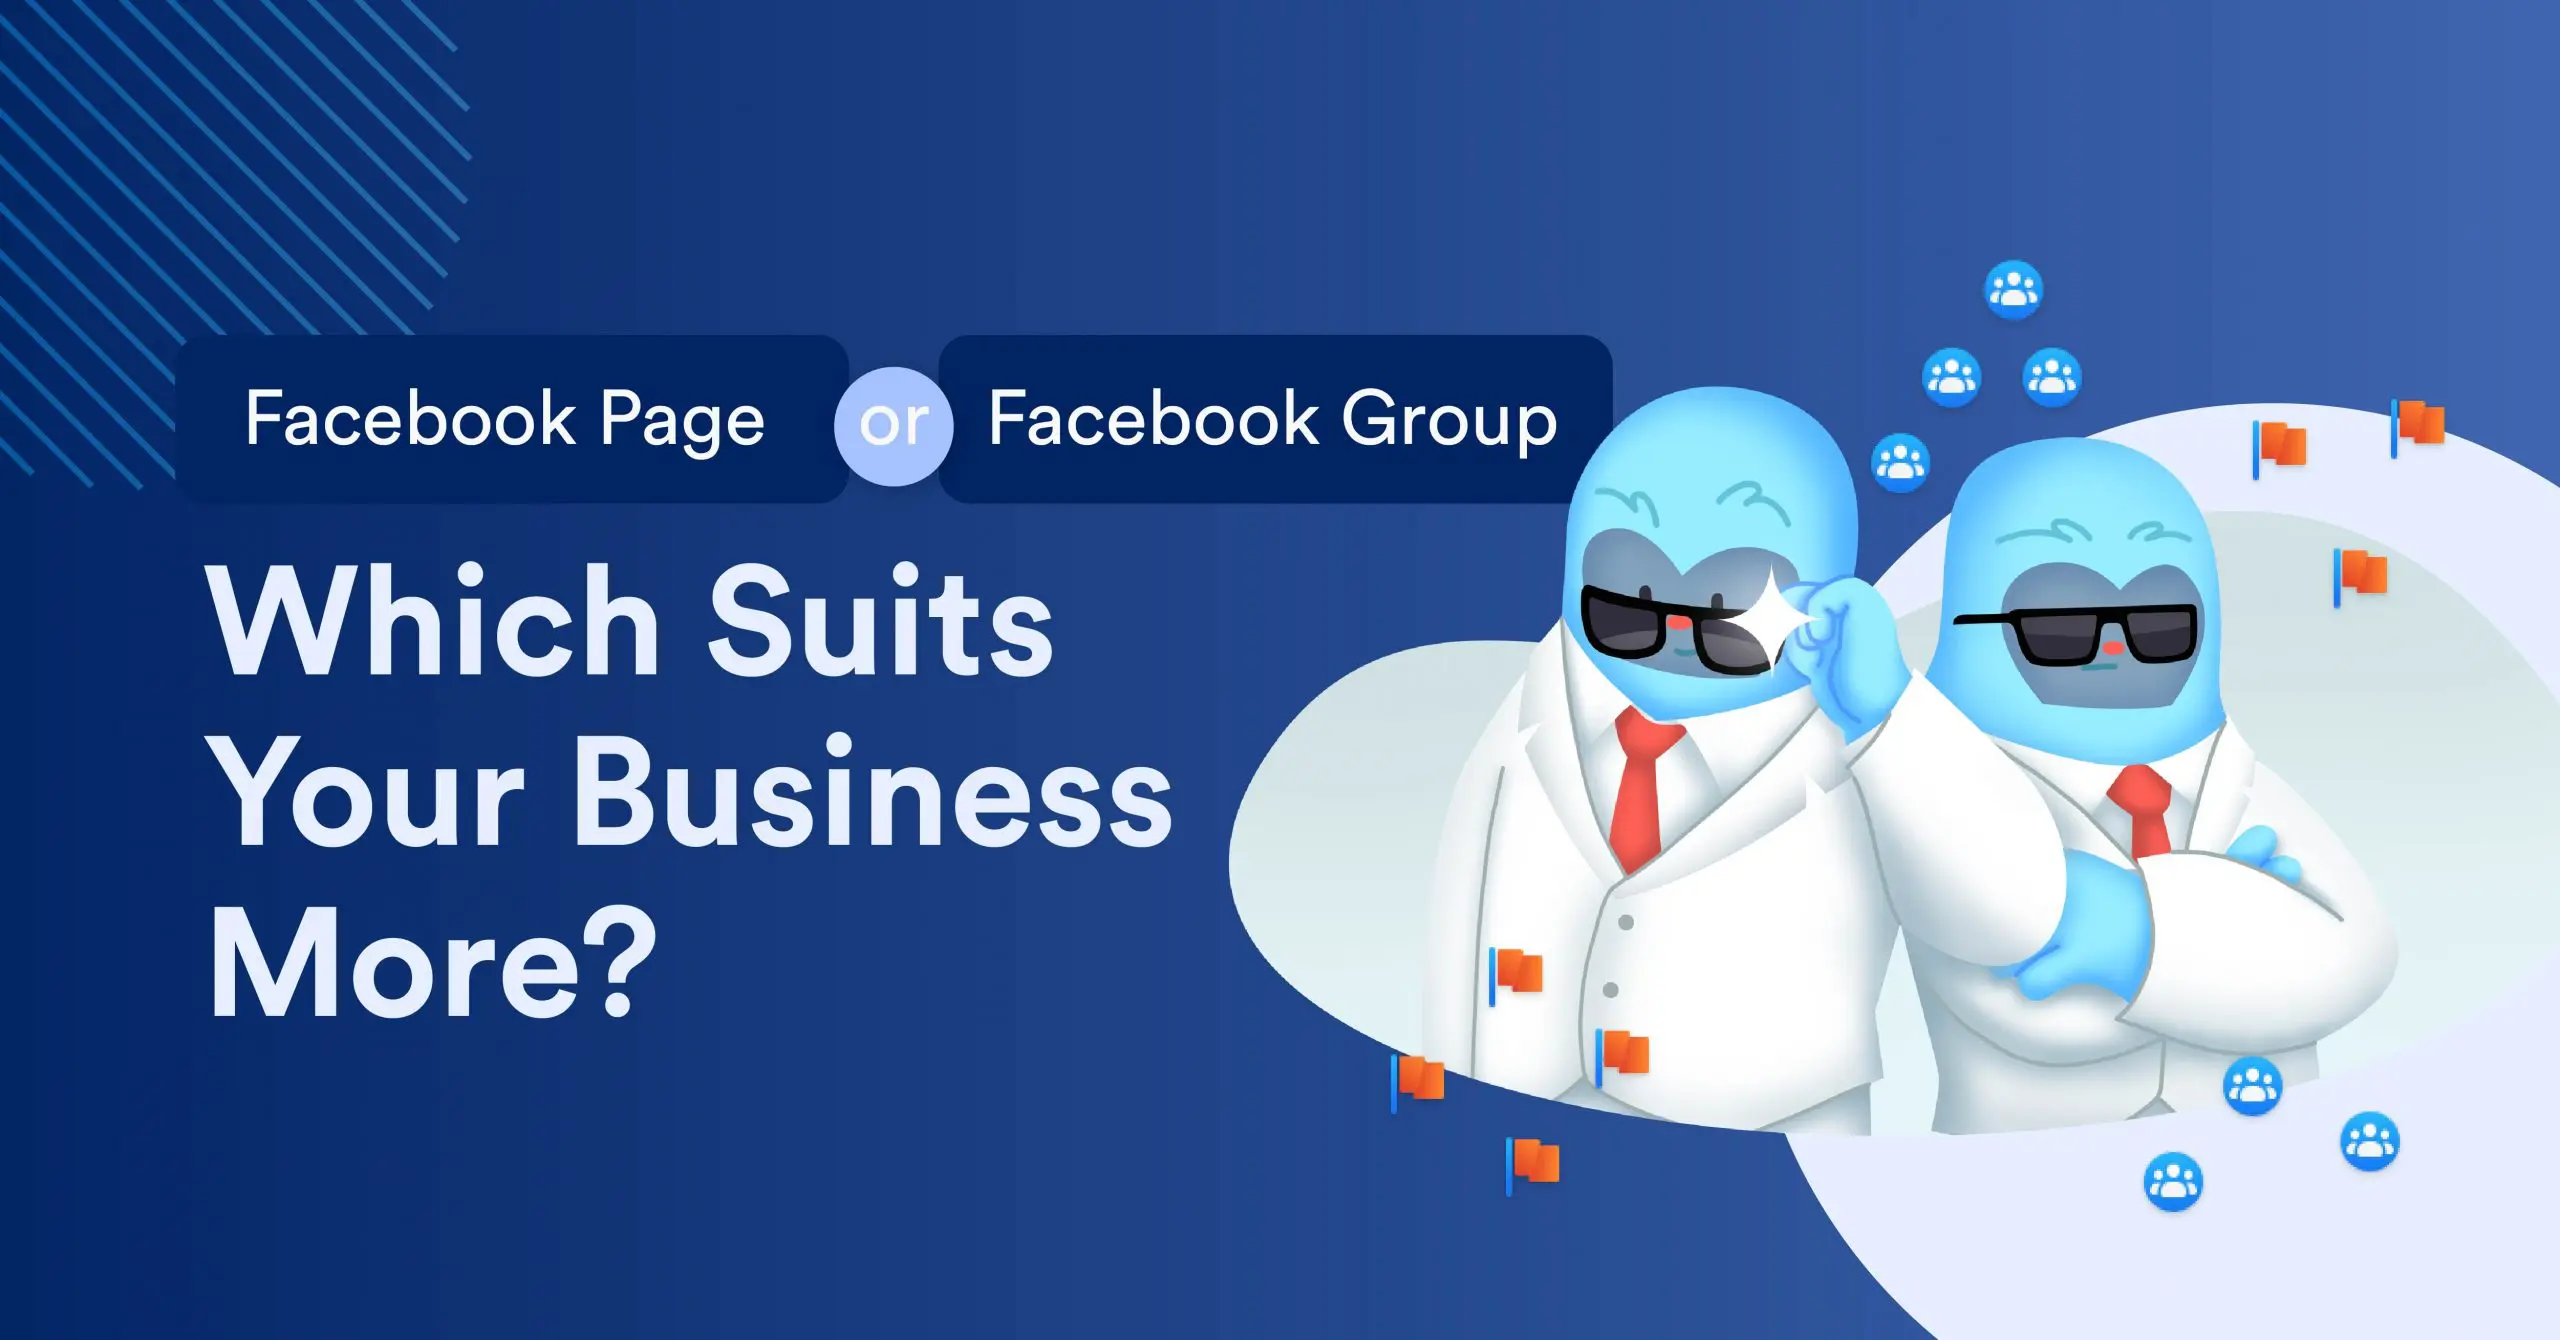 Facebook Page or Facebook Group: Which Suits Your Business More?